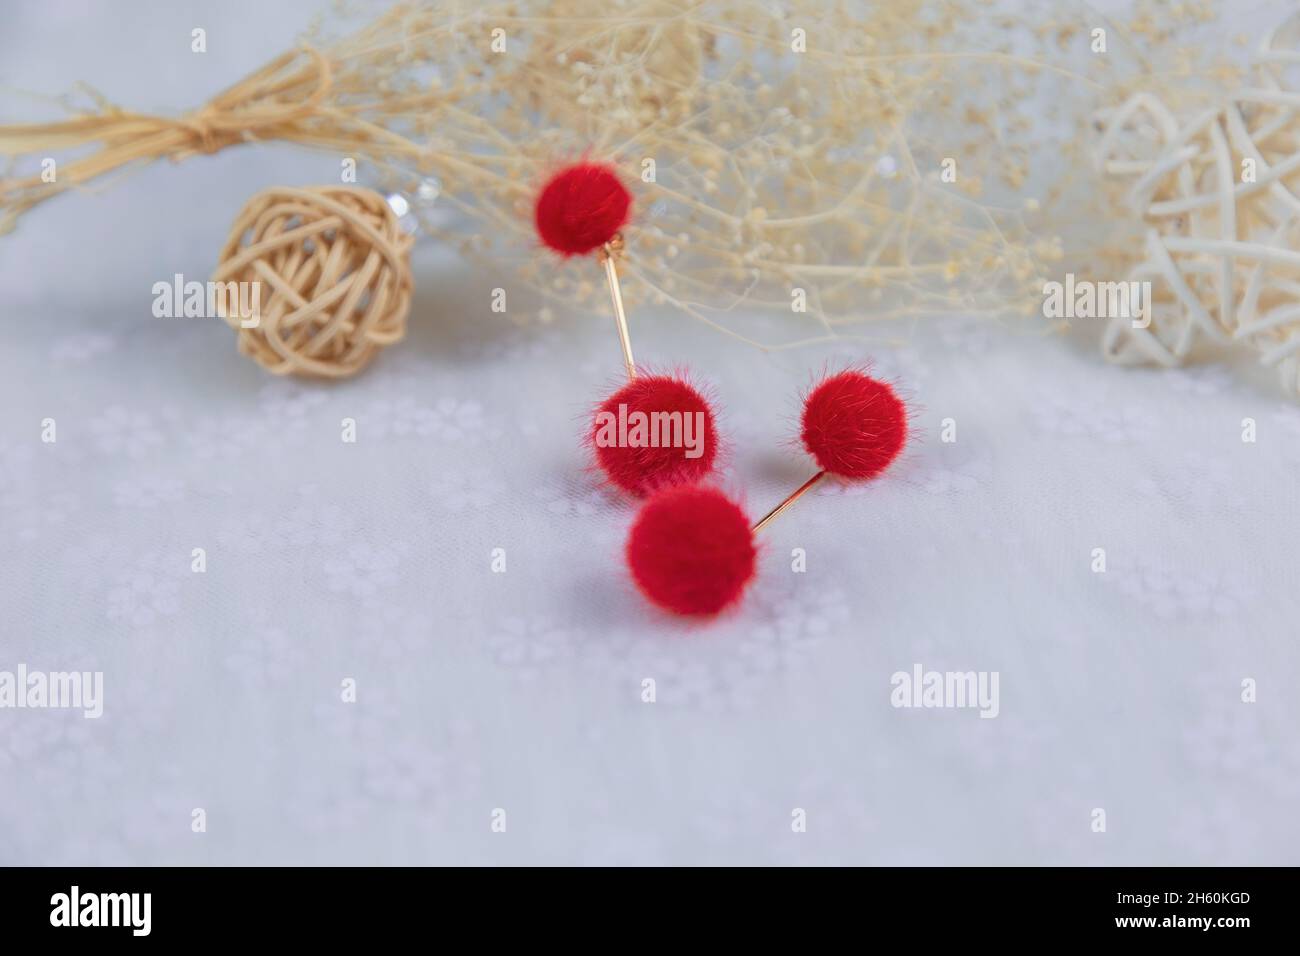 Red pompon earrings in the shape of two fluffy balls.Earrings are next to rattan products, flower specimens and other ornaments Stock Photo